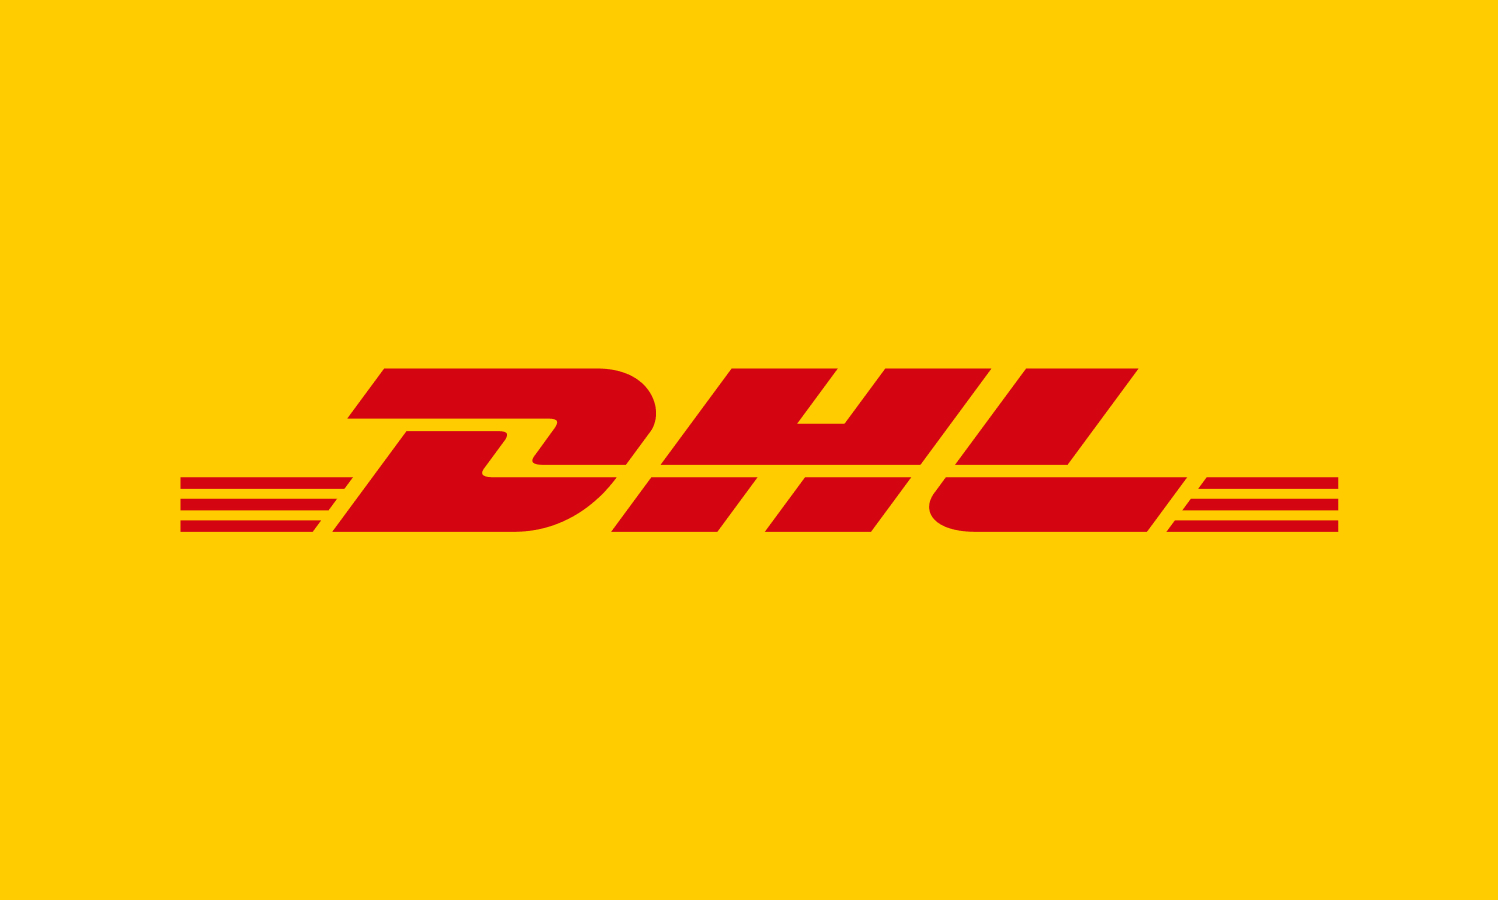 DHL logo in red on a golden yellow background.